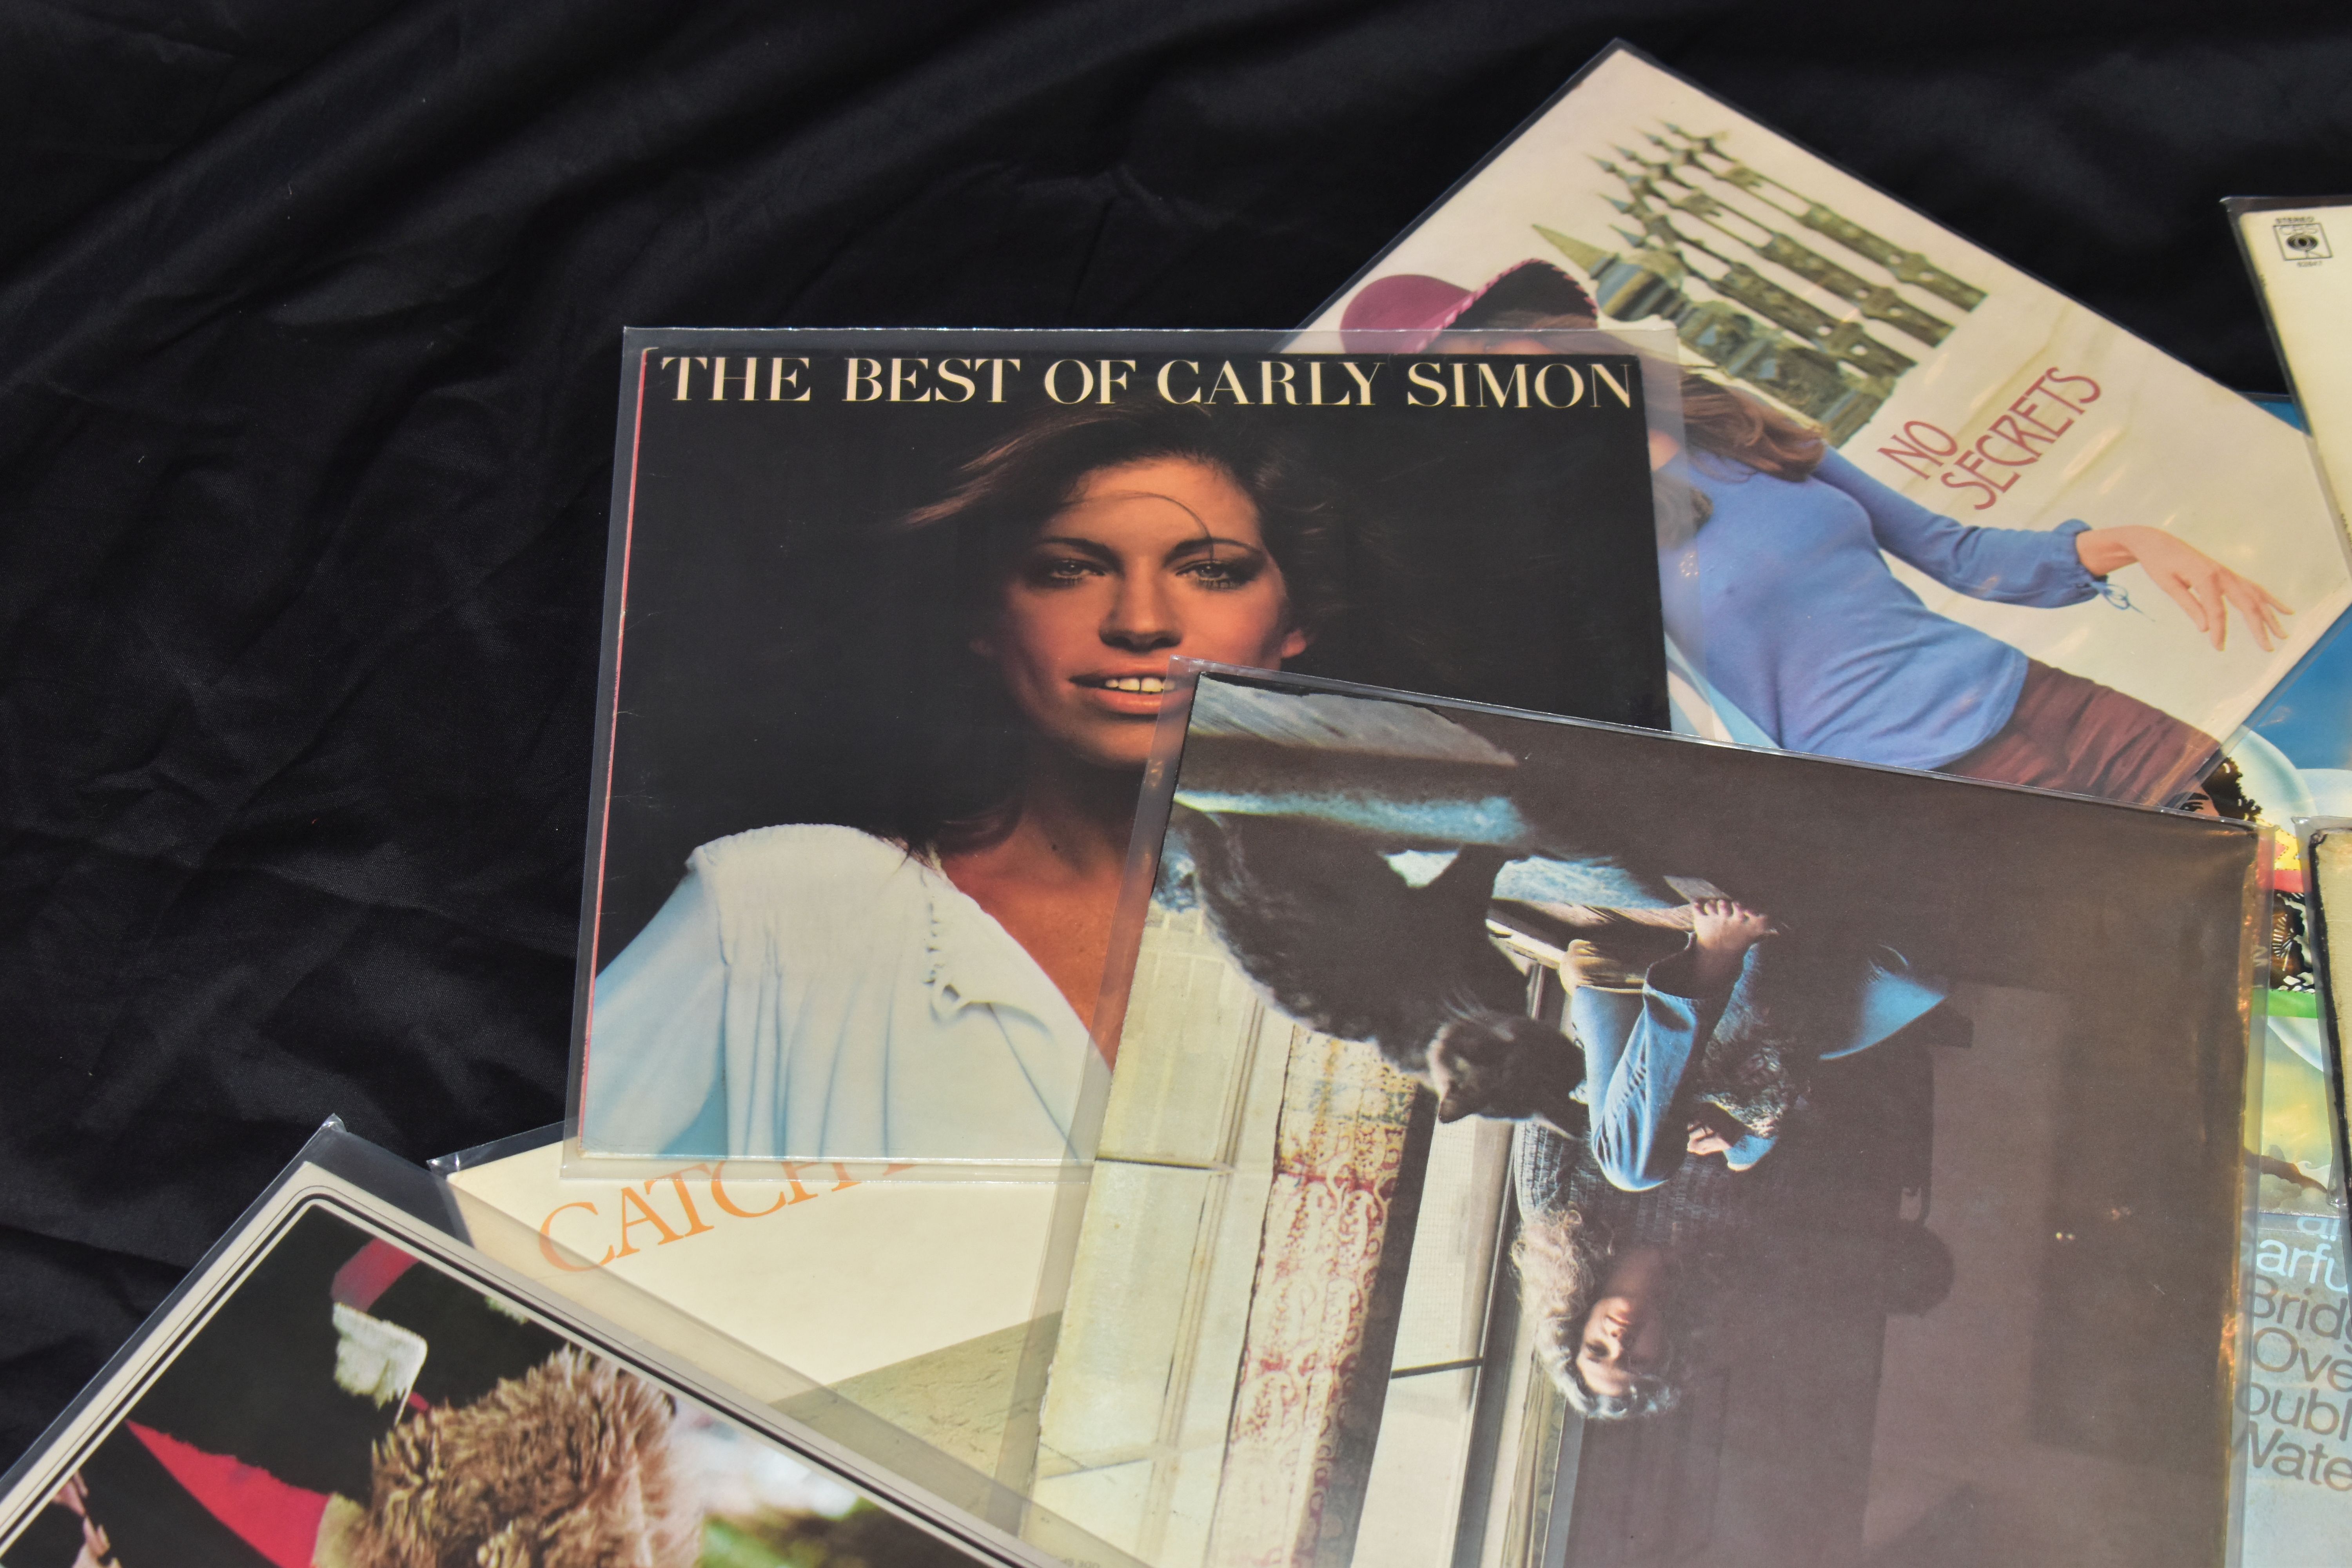 A COLLECTION OF TWENTY FOLK MUSIC LPs by artists such as Cat Stevens, Bob Dylan, Simon and Garfunkel - Image 4 of 6